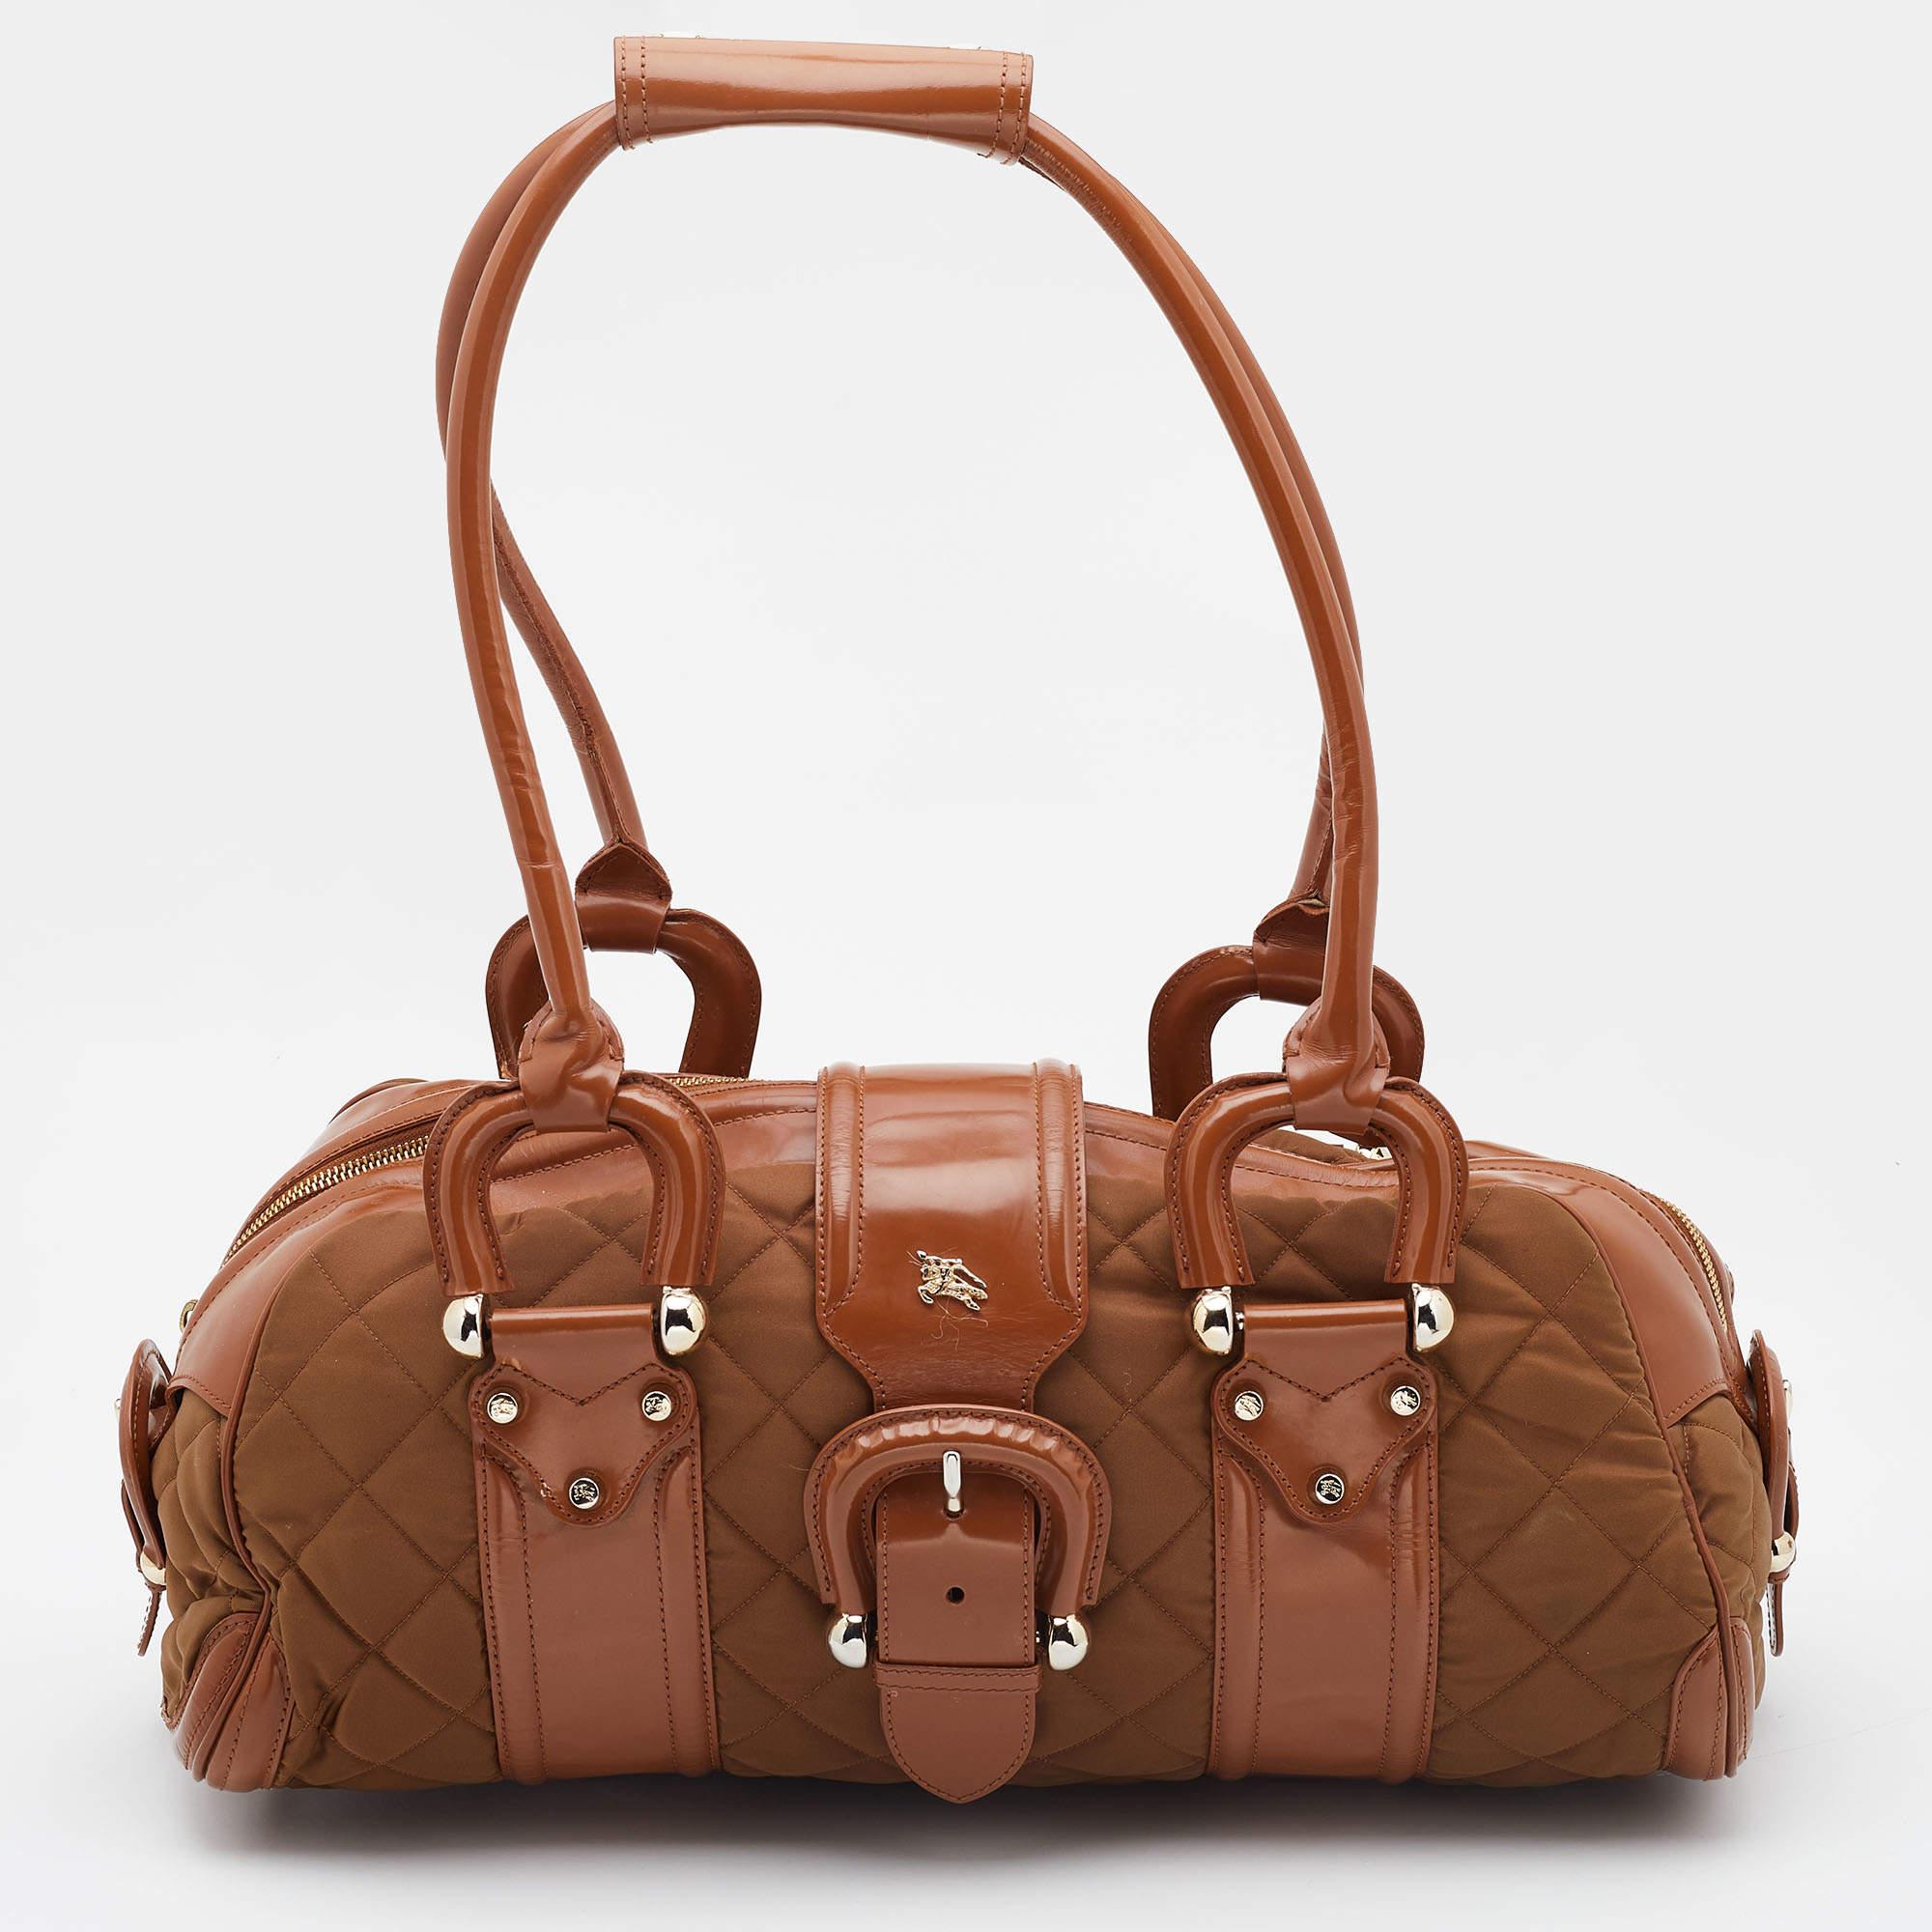 Burberry Brown/Tan Nylon and Leather Large Manor Satchel For Sale 3